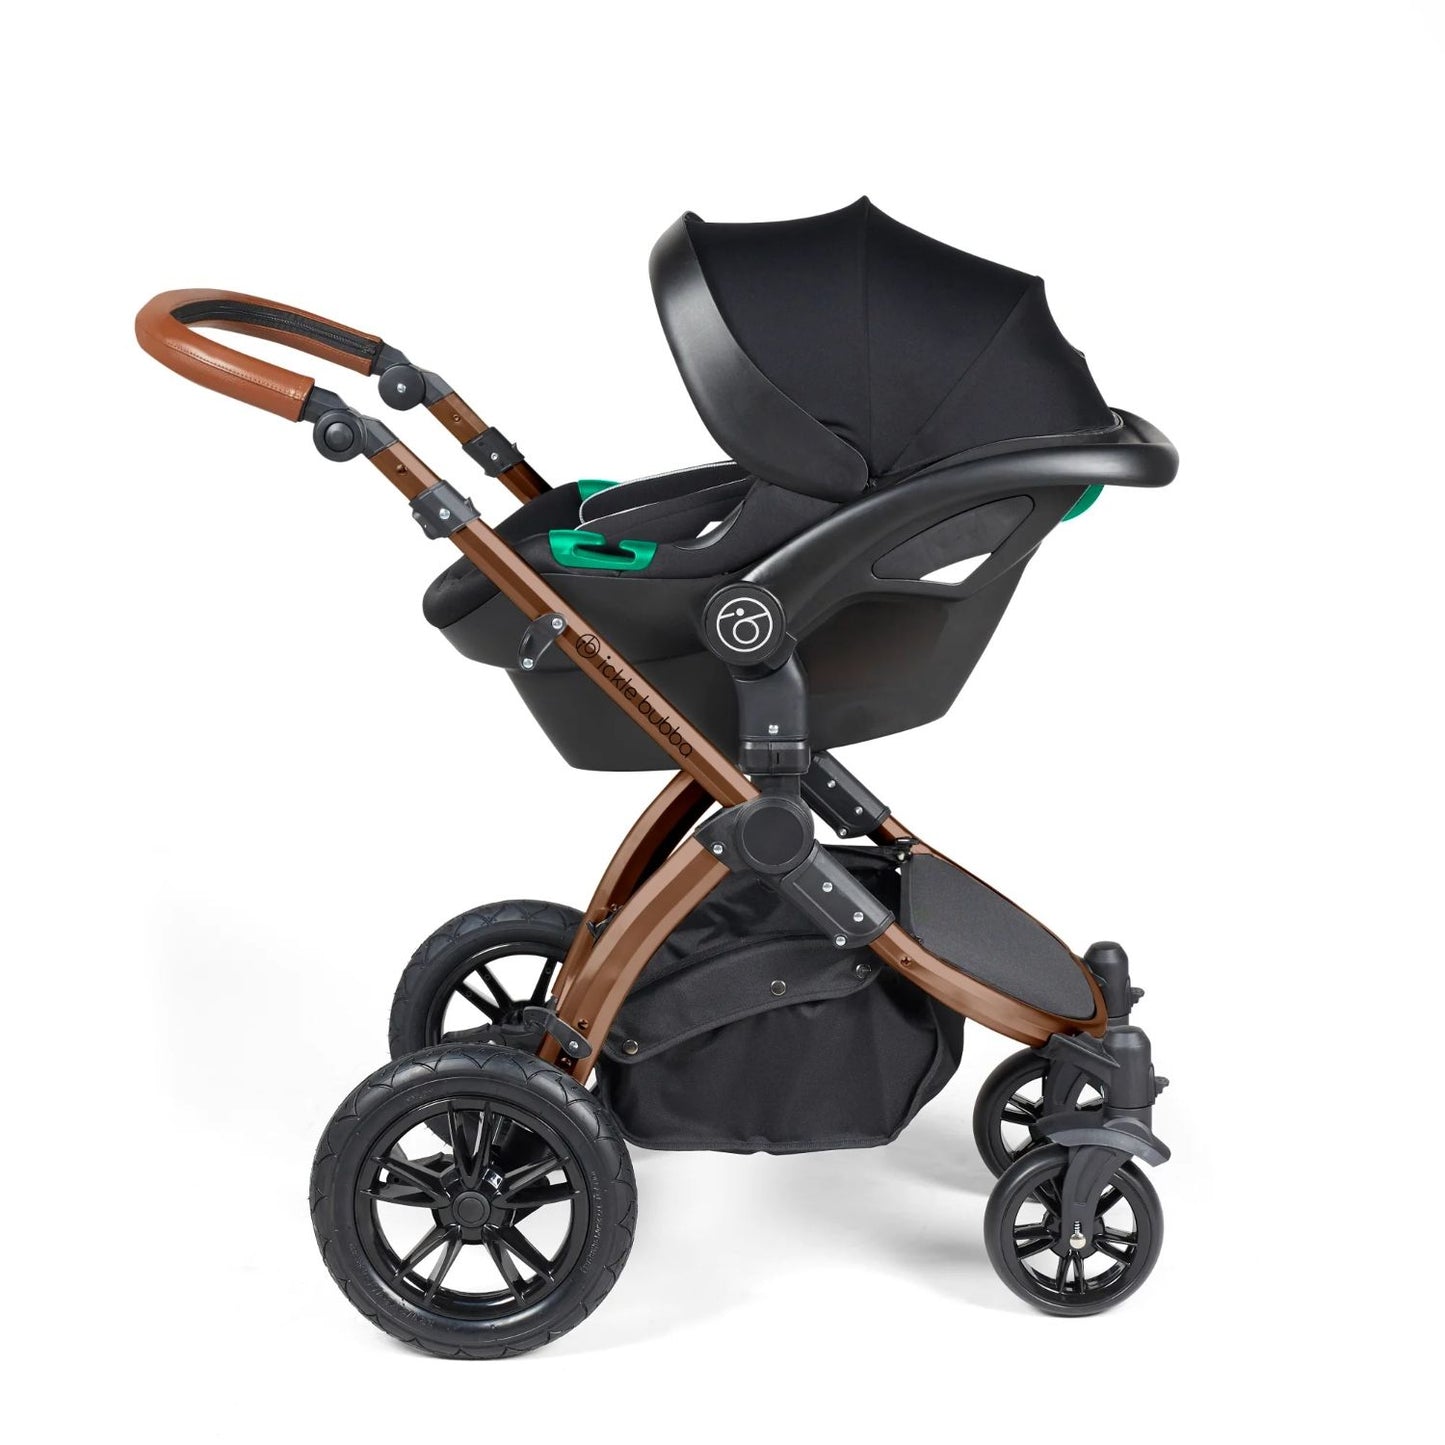 Ickle Bubba Stomp Luxe Pushchair with Stratus i-Size car seat attached in Woodland green colour with bronze chassis and tan handle